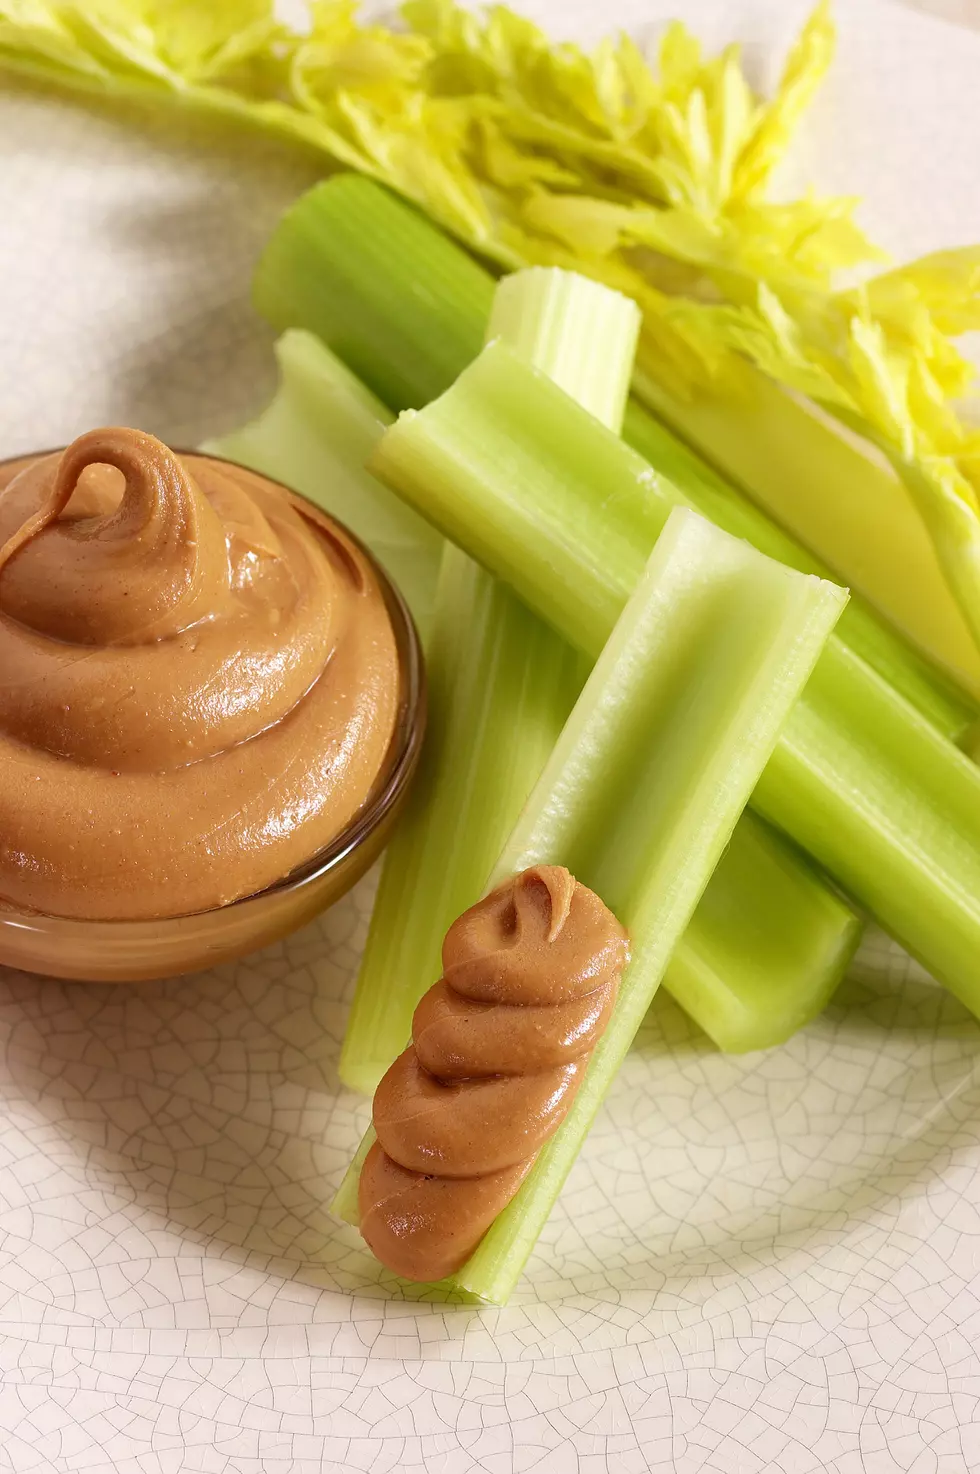 The Beet’s Plant-Based Diet Recipe: Celery and Nut Butter for Snack